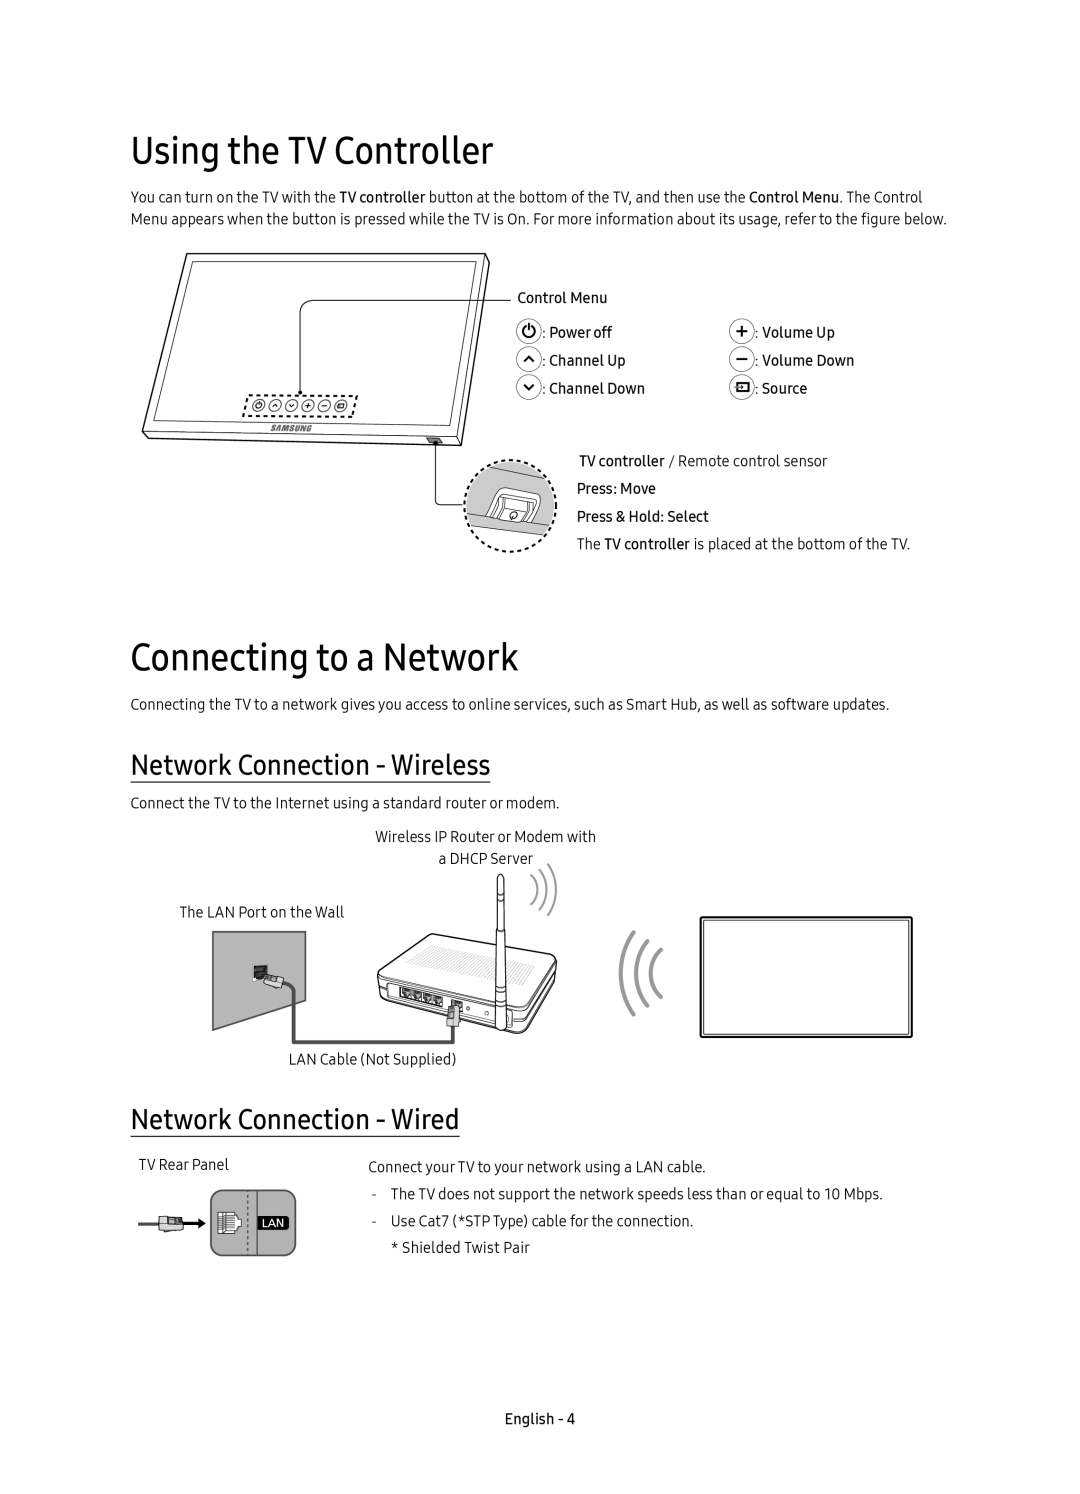 Samsung UE49K6370SUXZG manual Using the TV Controller, Connecting to a Network, Network Connection - Wireless, Control Menu 